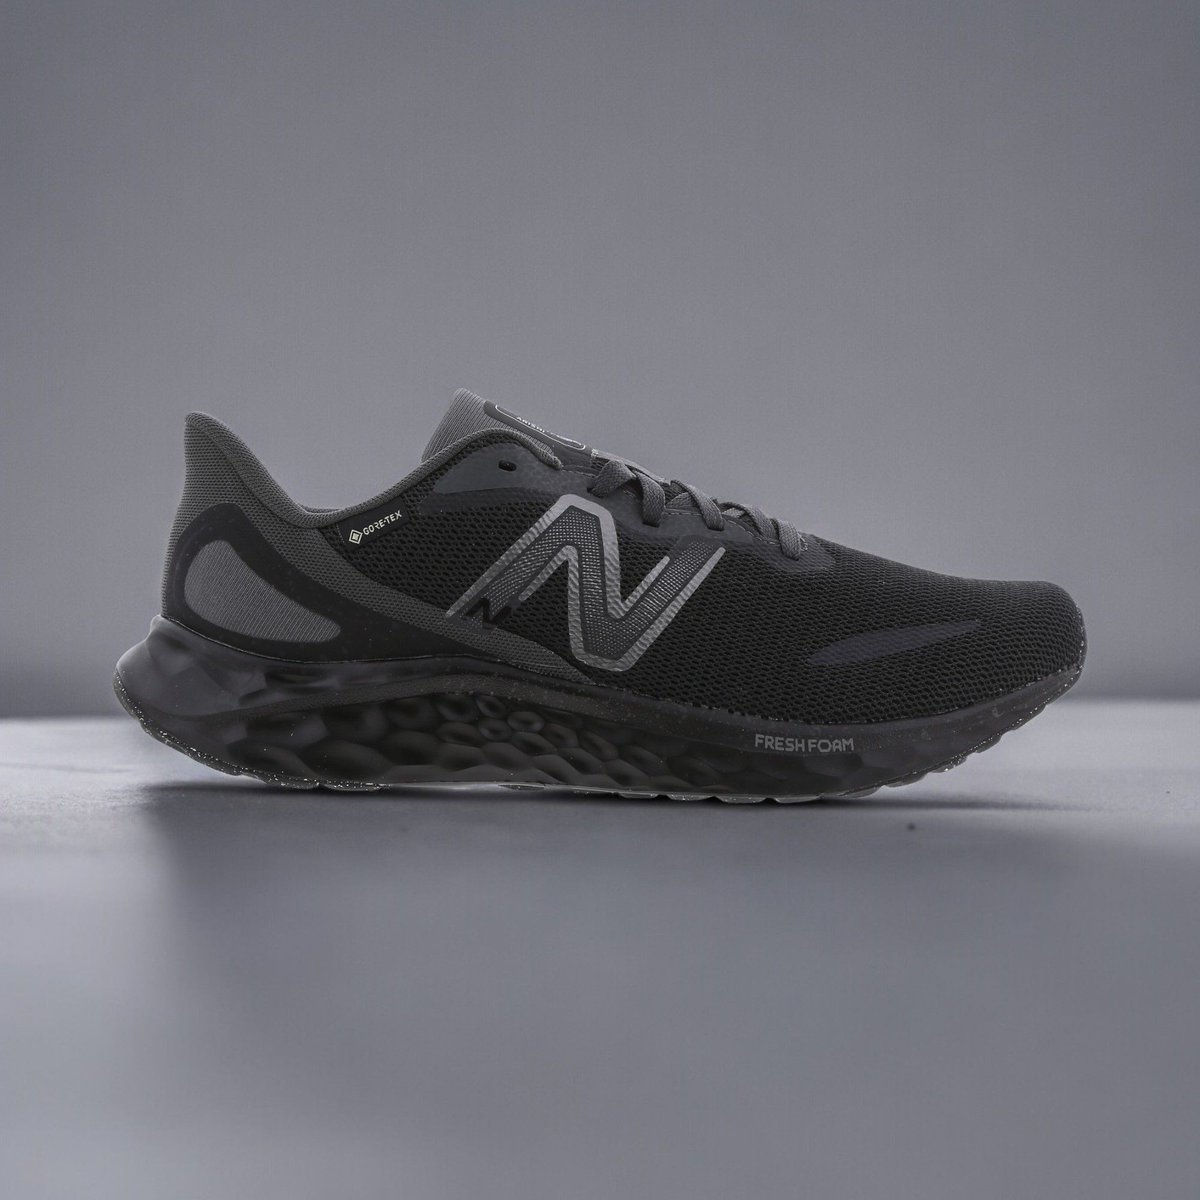 🔥ON SALE @ Footlocker - New Balance Arishi “Triple Black” ✅ Price £44.99 (RRP £99.99) 👟 Sizes UK 6.5-11.5 Available! 💷 Buy now, Pay later with Klarna Link=> bit.ly/3wcI9iA